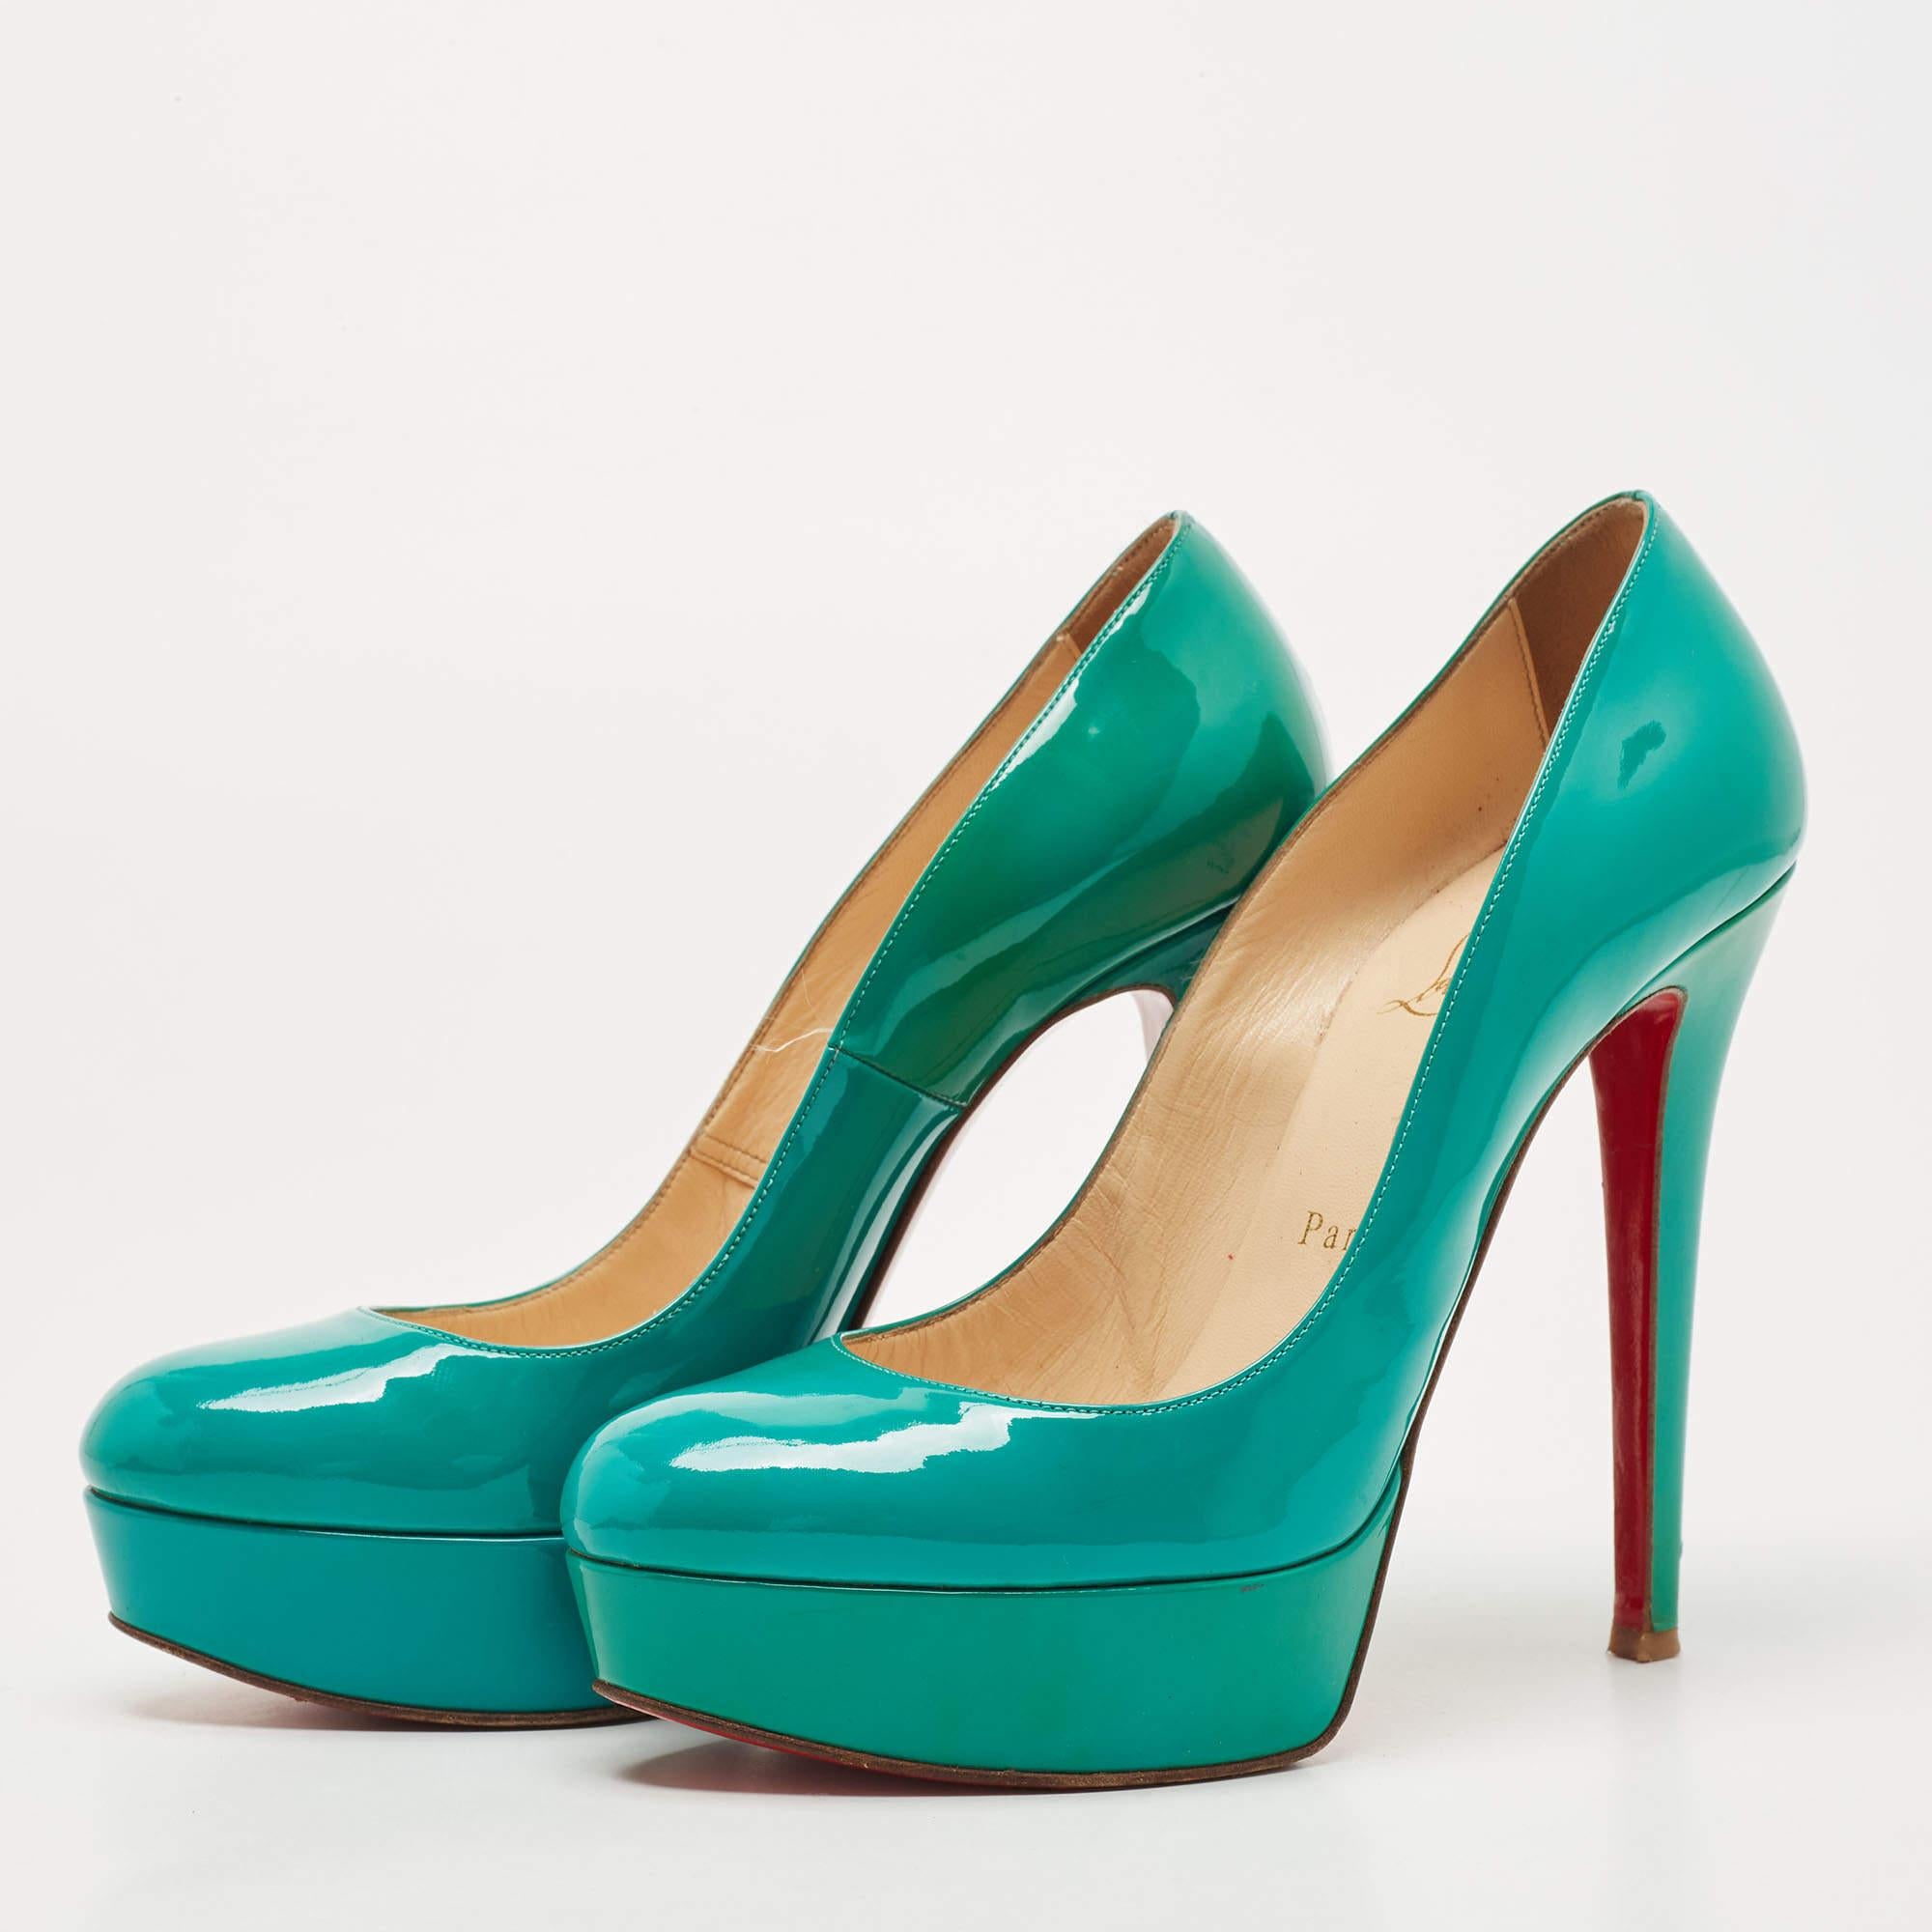 Exhibit an elegant style with this pair of pumps. These Christian Louboutin shoes for women are crafted from quality materials. They are set on durable soles and sleek heels.

